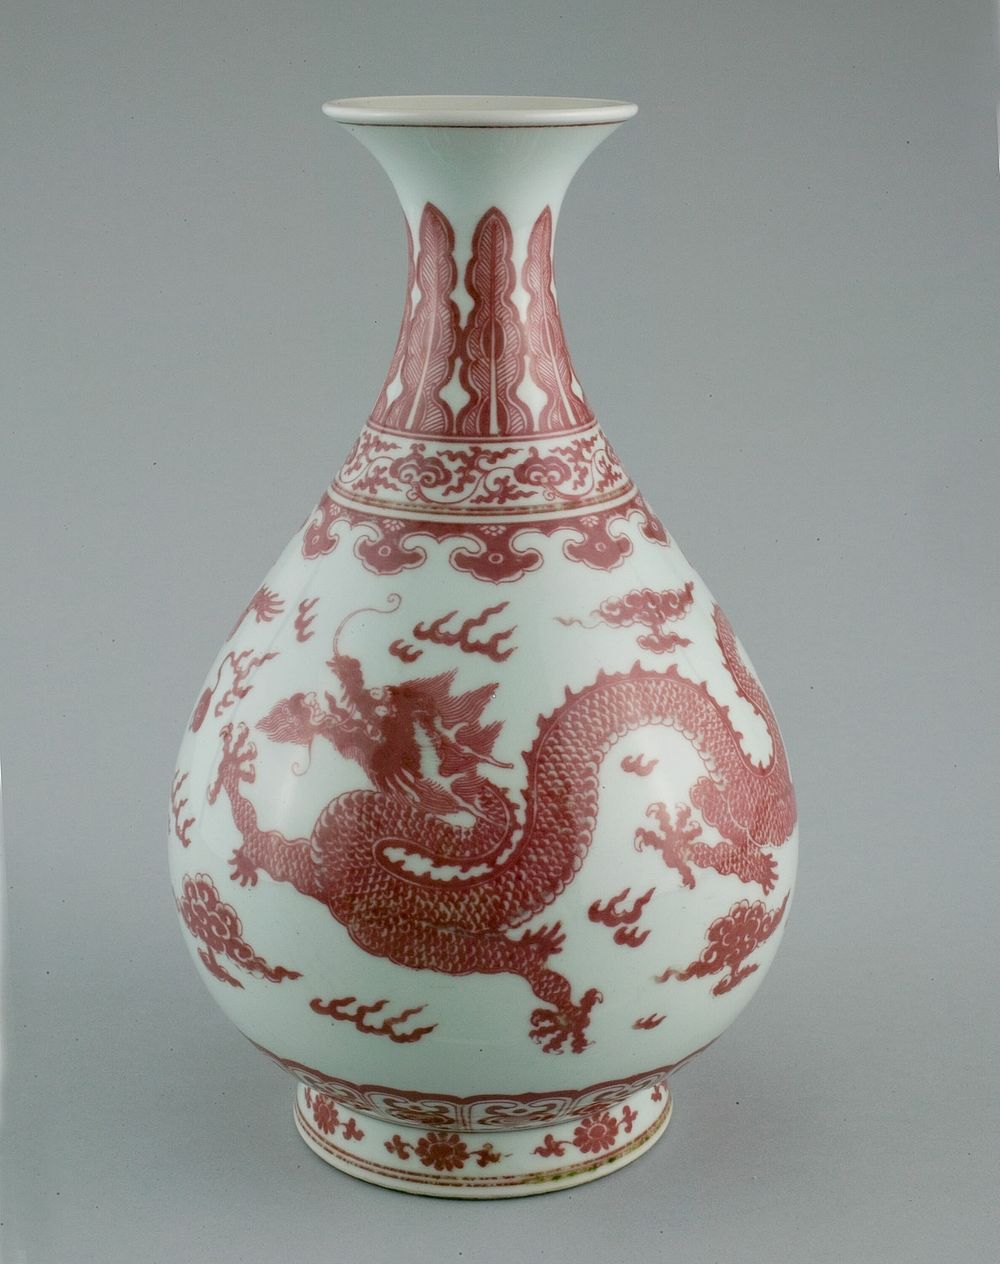 Bottle Vase with Dragons amid Clouds, Chasing Flaming Pearls; Pendant Ruyi; Lingzhi Scrolls; Upright Leaves and Petal…